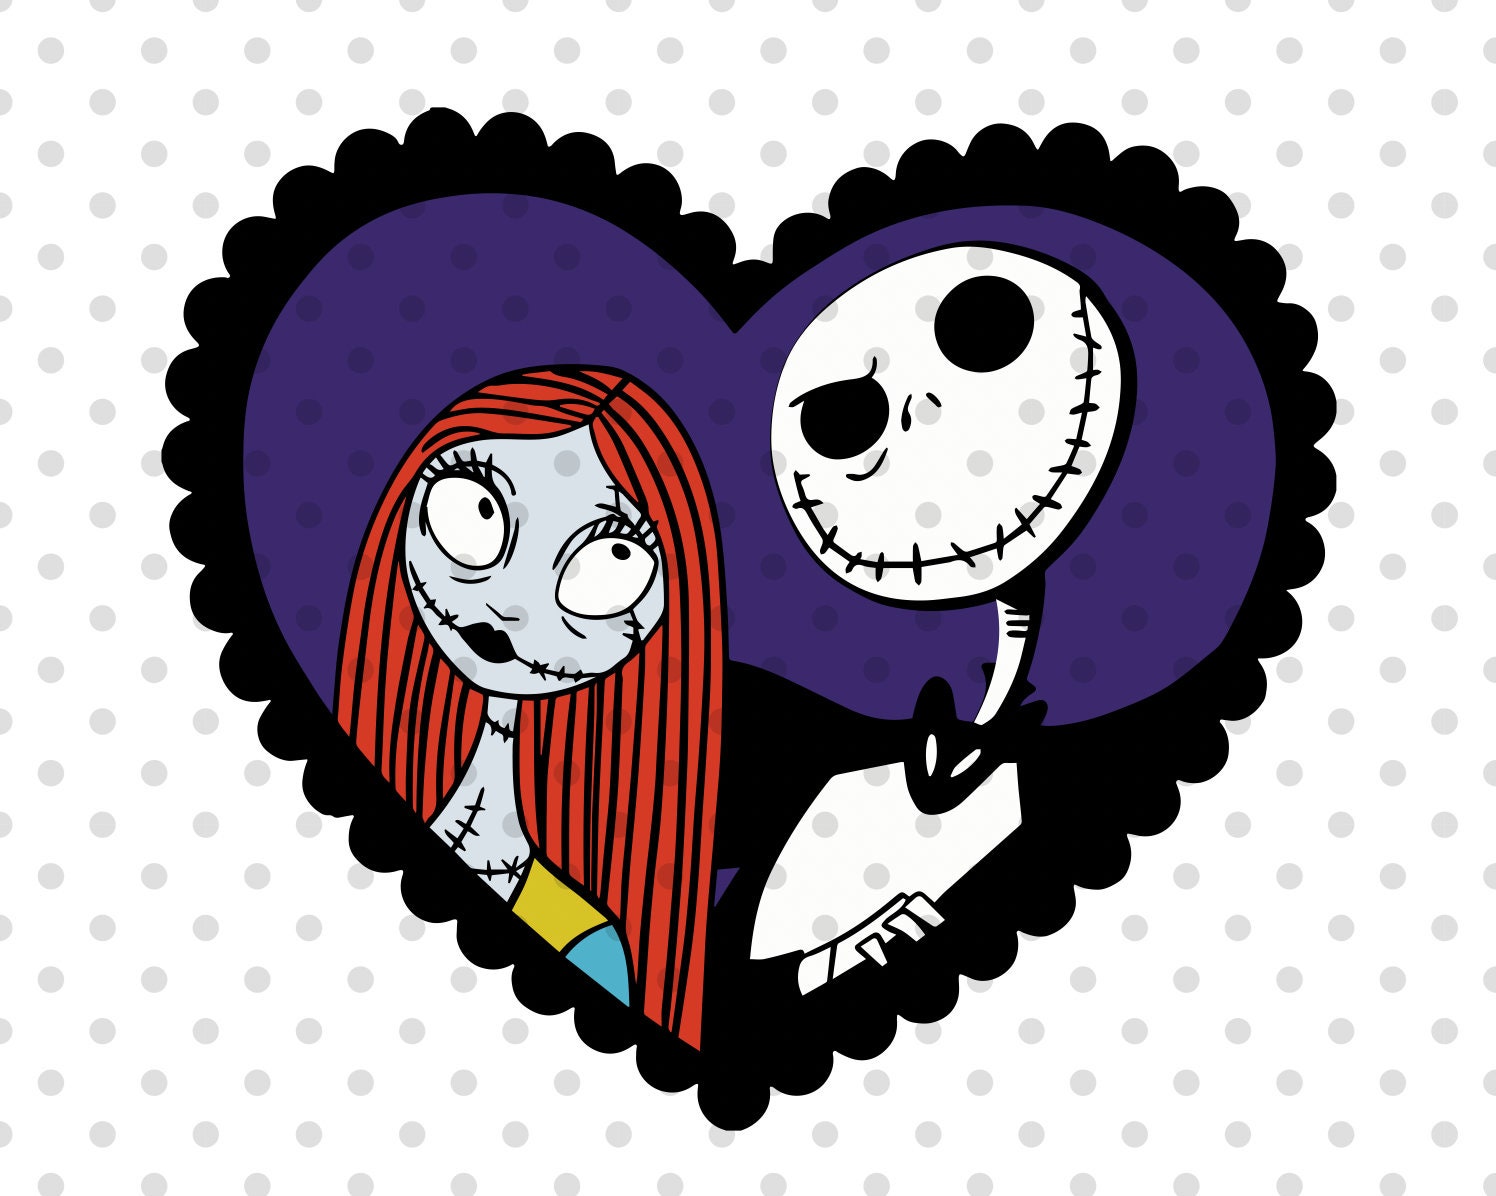 1. Jack and Sally Heart Tattoo Designs - wide 4